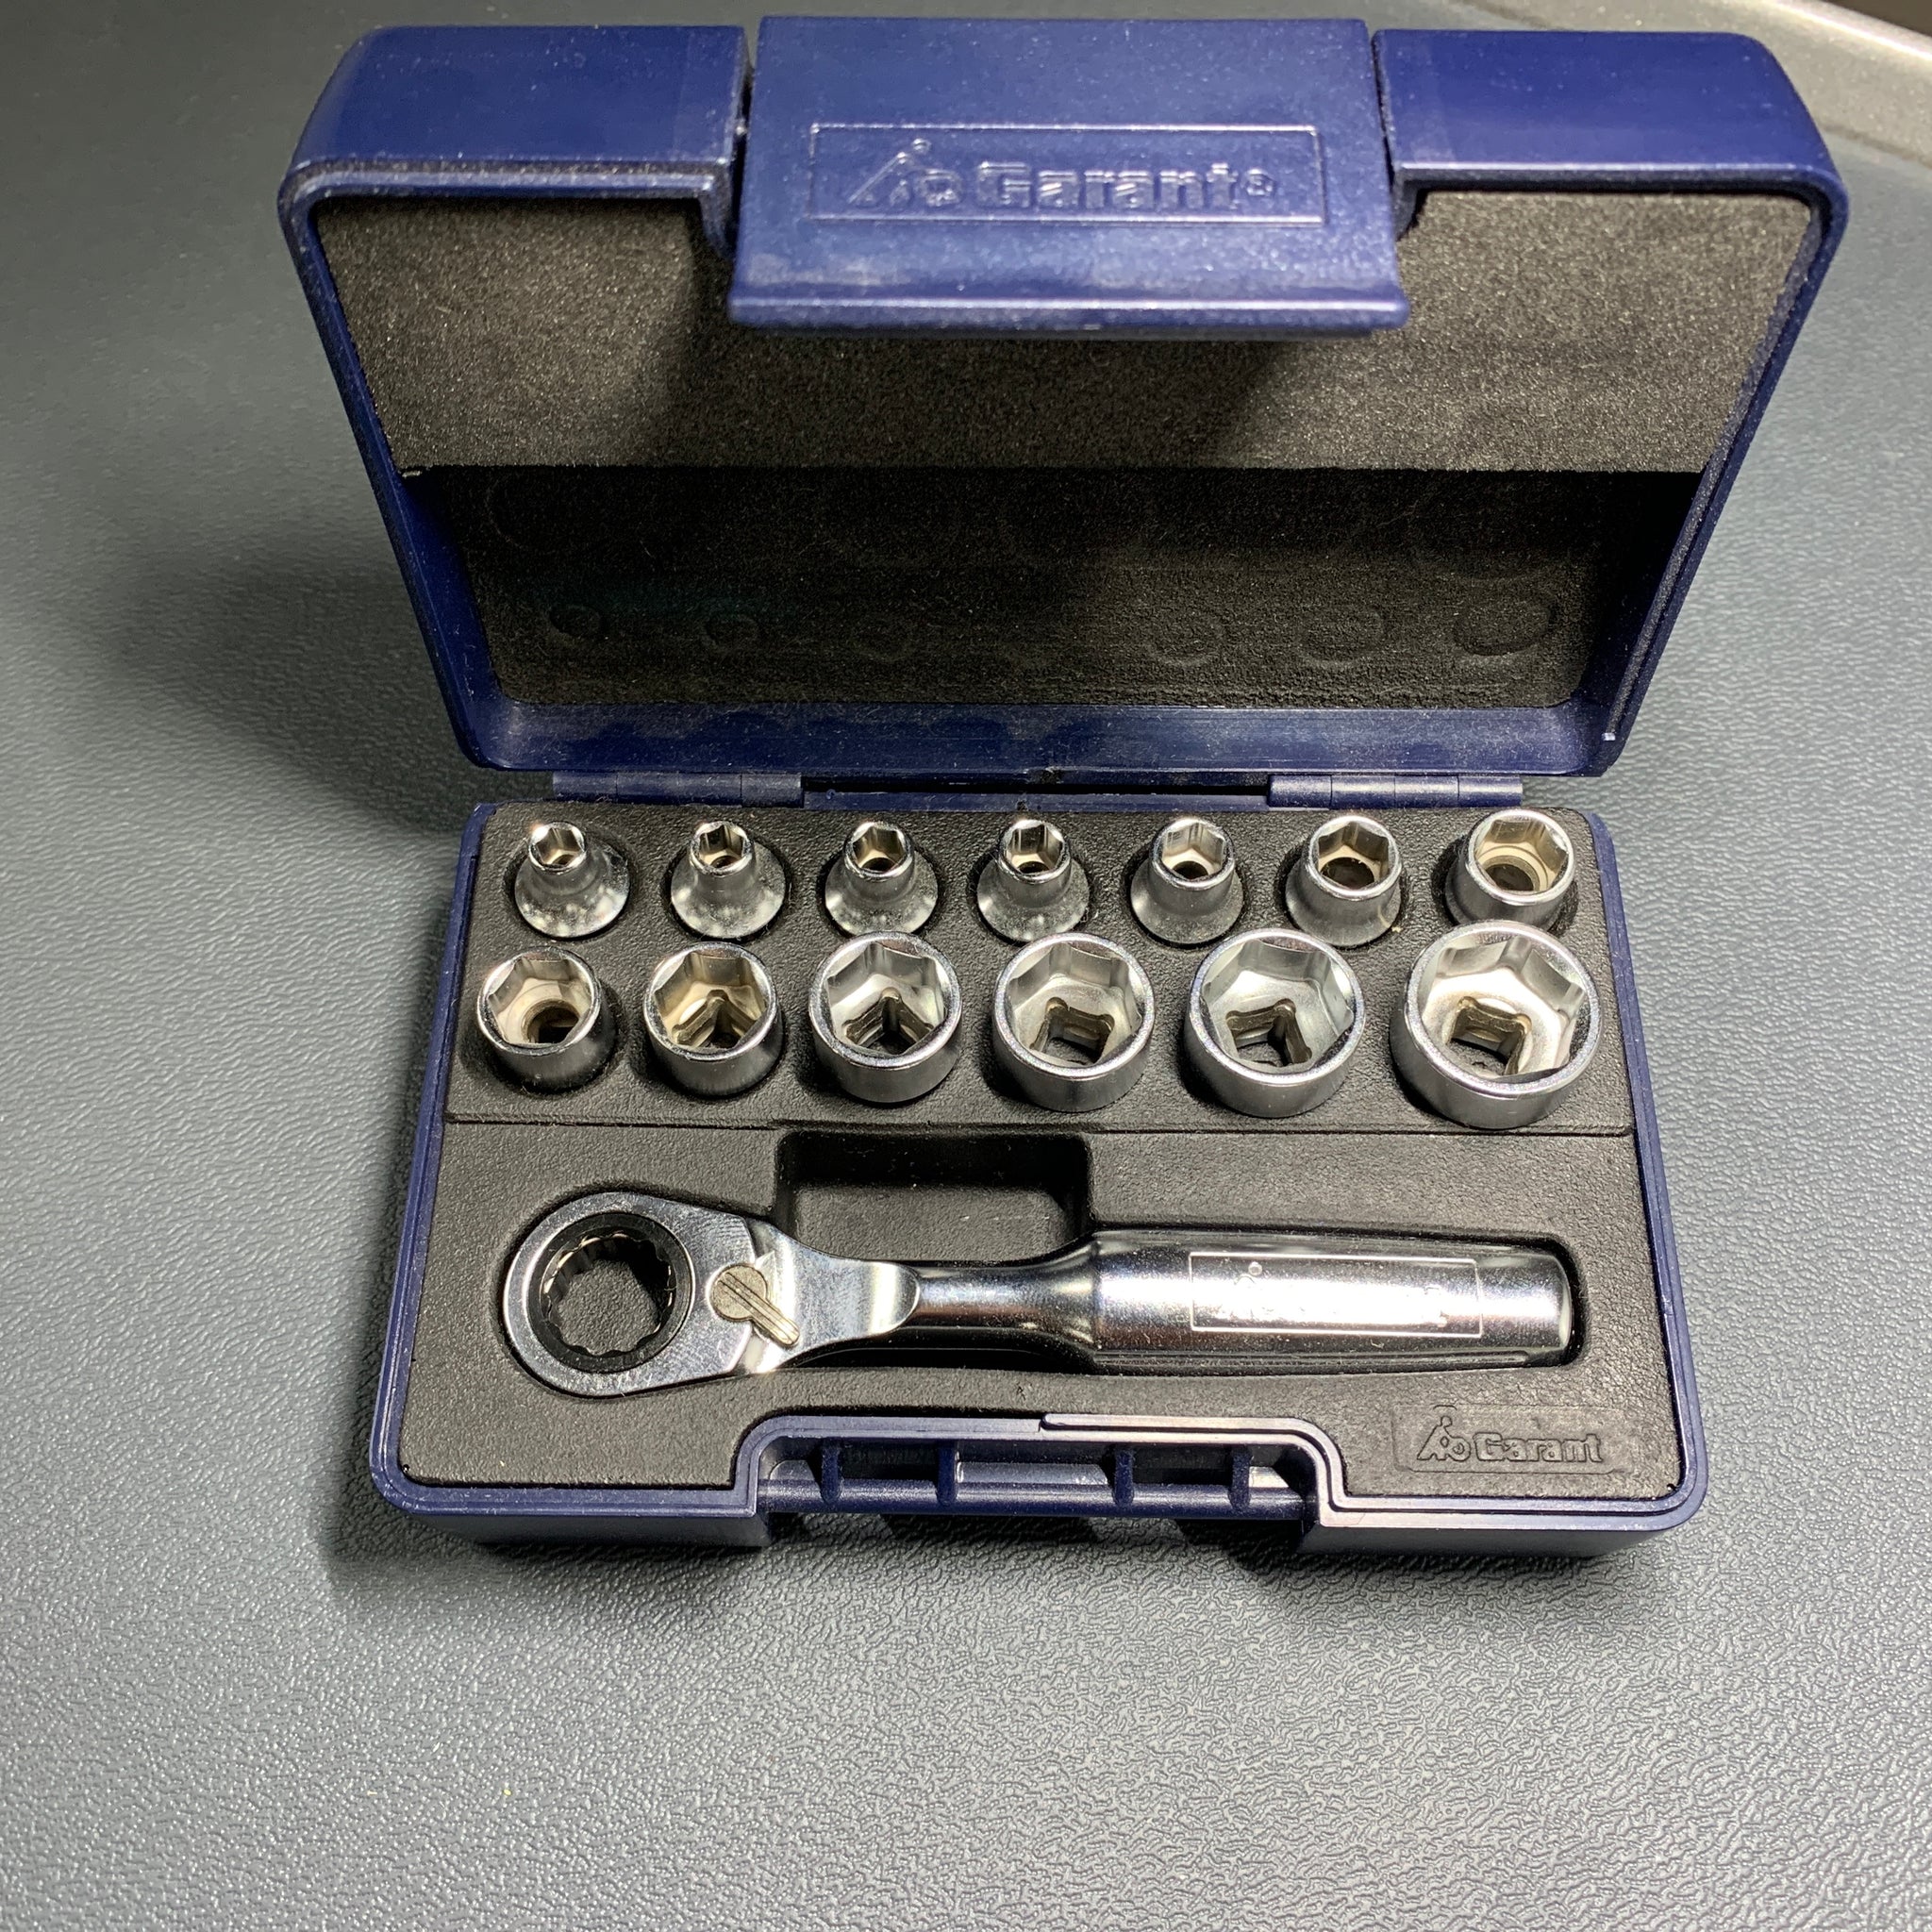 RATCHING WRENCH LOW PROFILE SOCKET SET